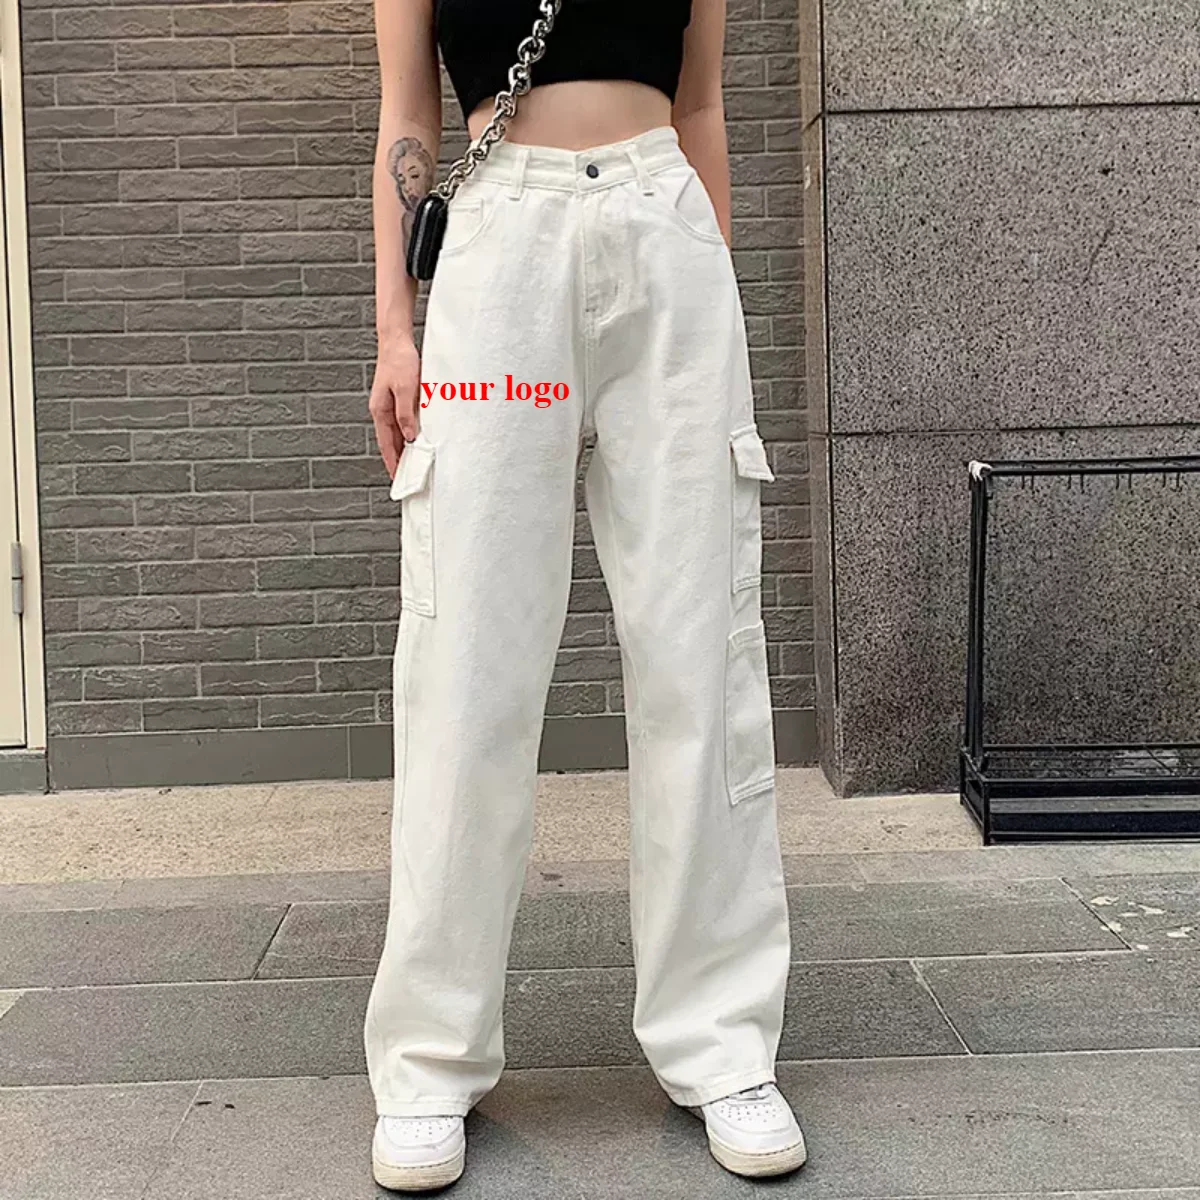 Defecte Motel Uitgaven Y2k Aesthetic Cute Baggy Jeans Vintage Fairycore Grunge Denim Cargo Pants  Fashion Harajuku Retro Women's Trousers - Buy Cargo Pants Women,Pants Women  High Waist,Women's Pants With Patches Product on Alibaba.com